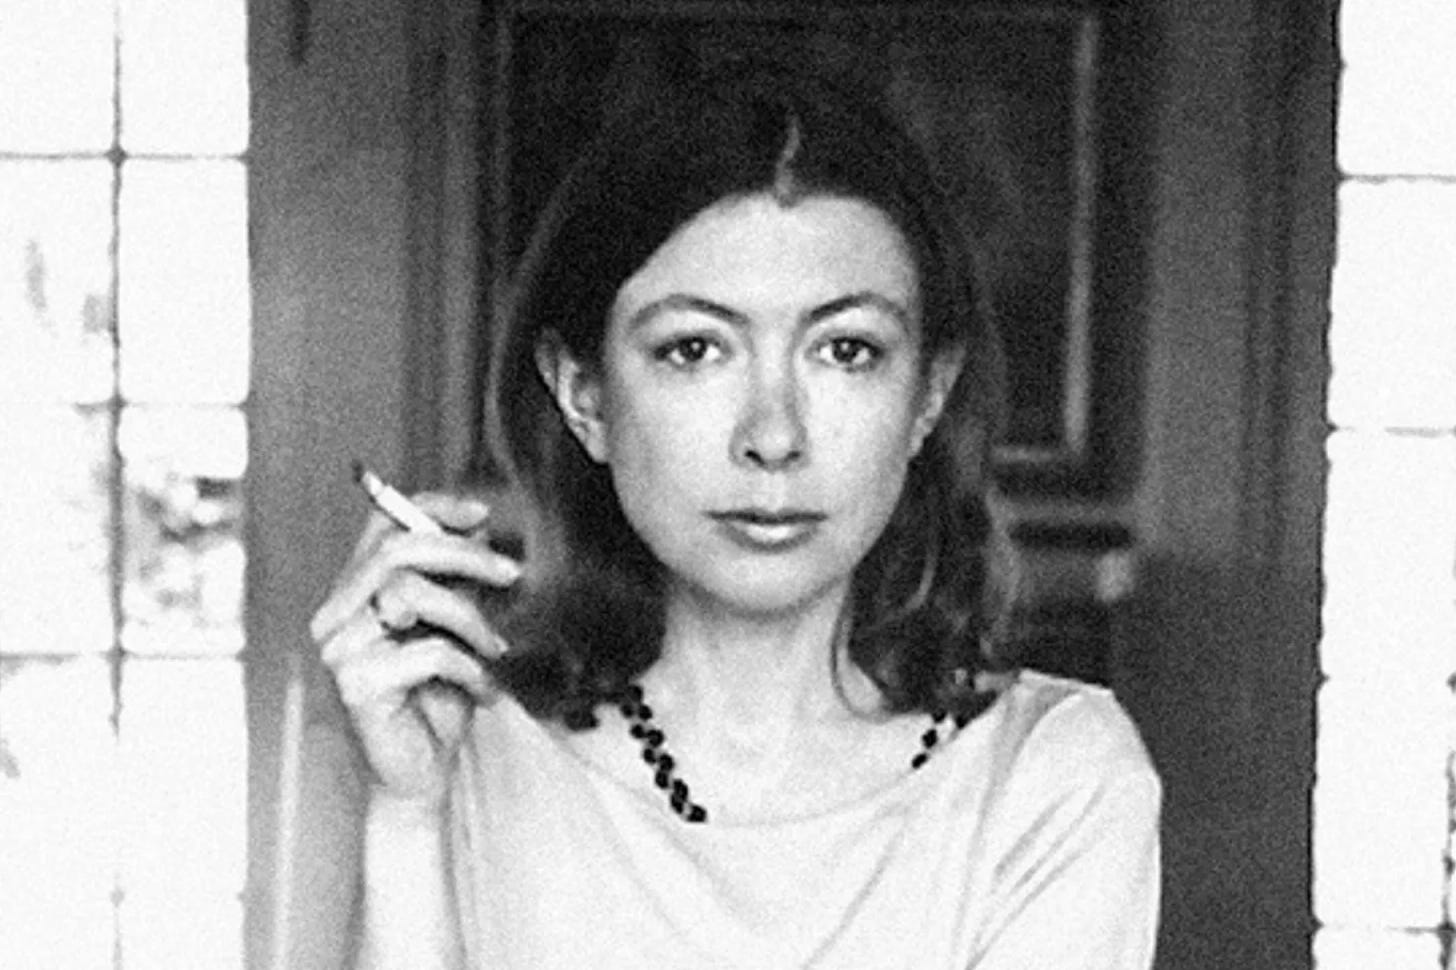 a black and white photo of writer Joan Didion holding a cigarette